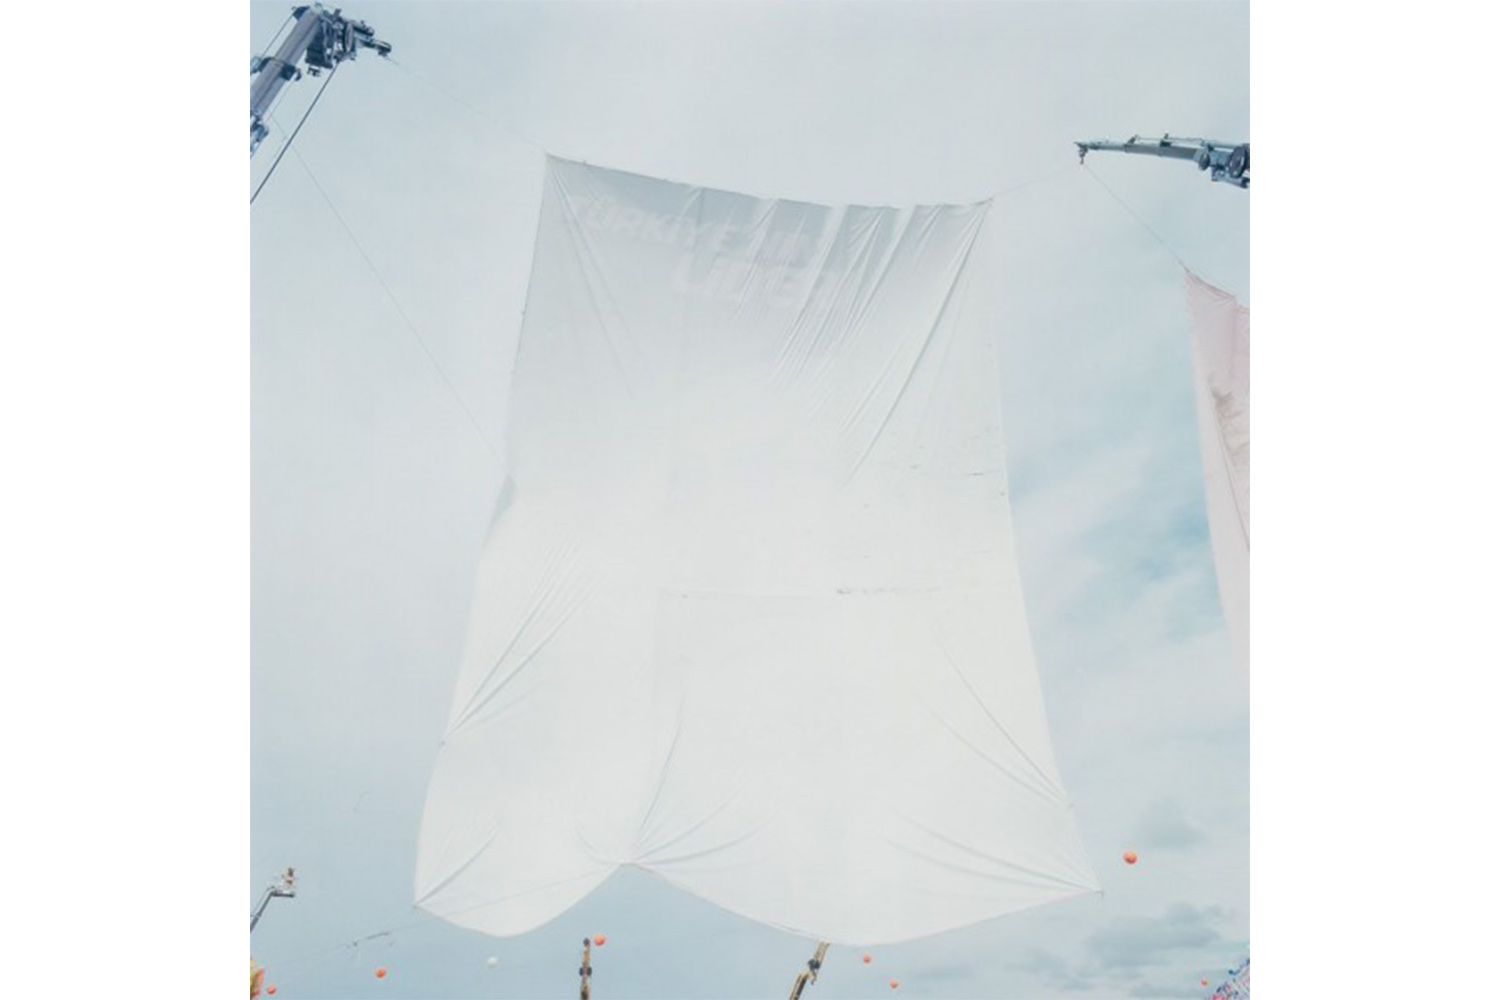 Redeployment_50, from the series ''Nothing Suprising'', 2008